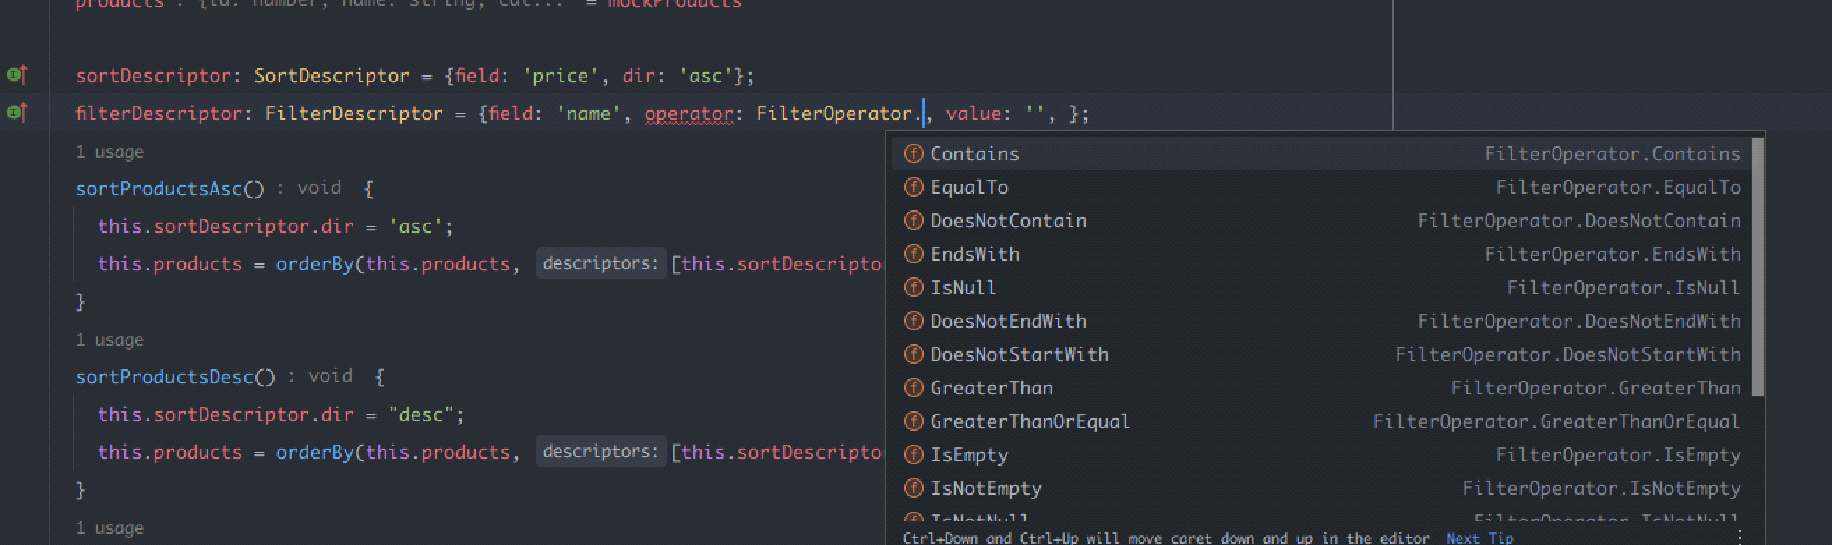 Code with predictive text for FilterOperator recommending Contains